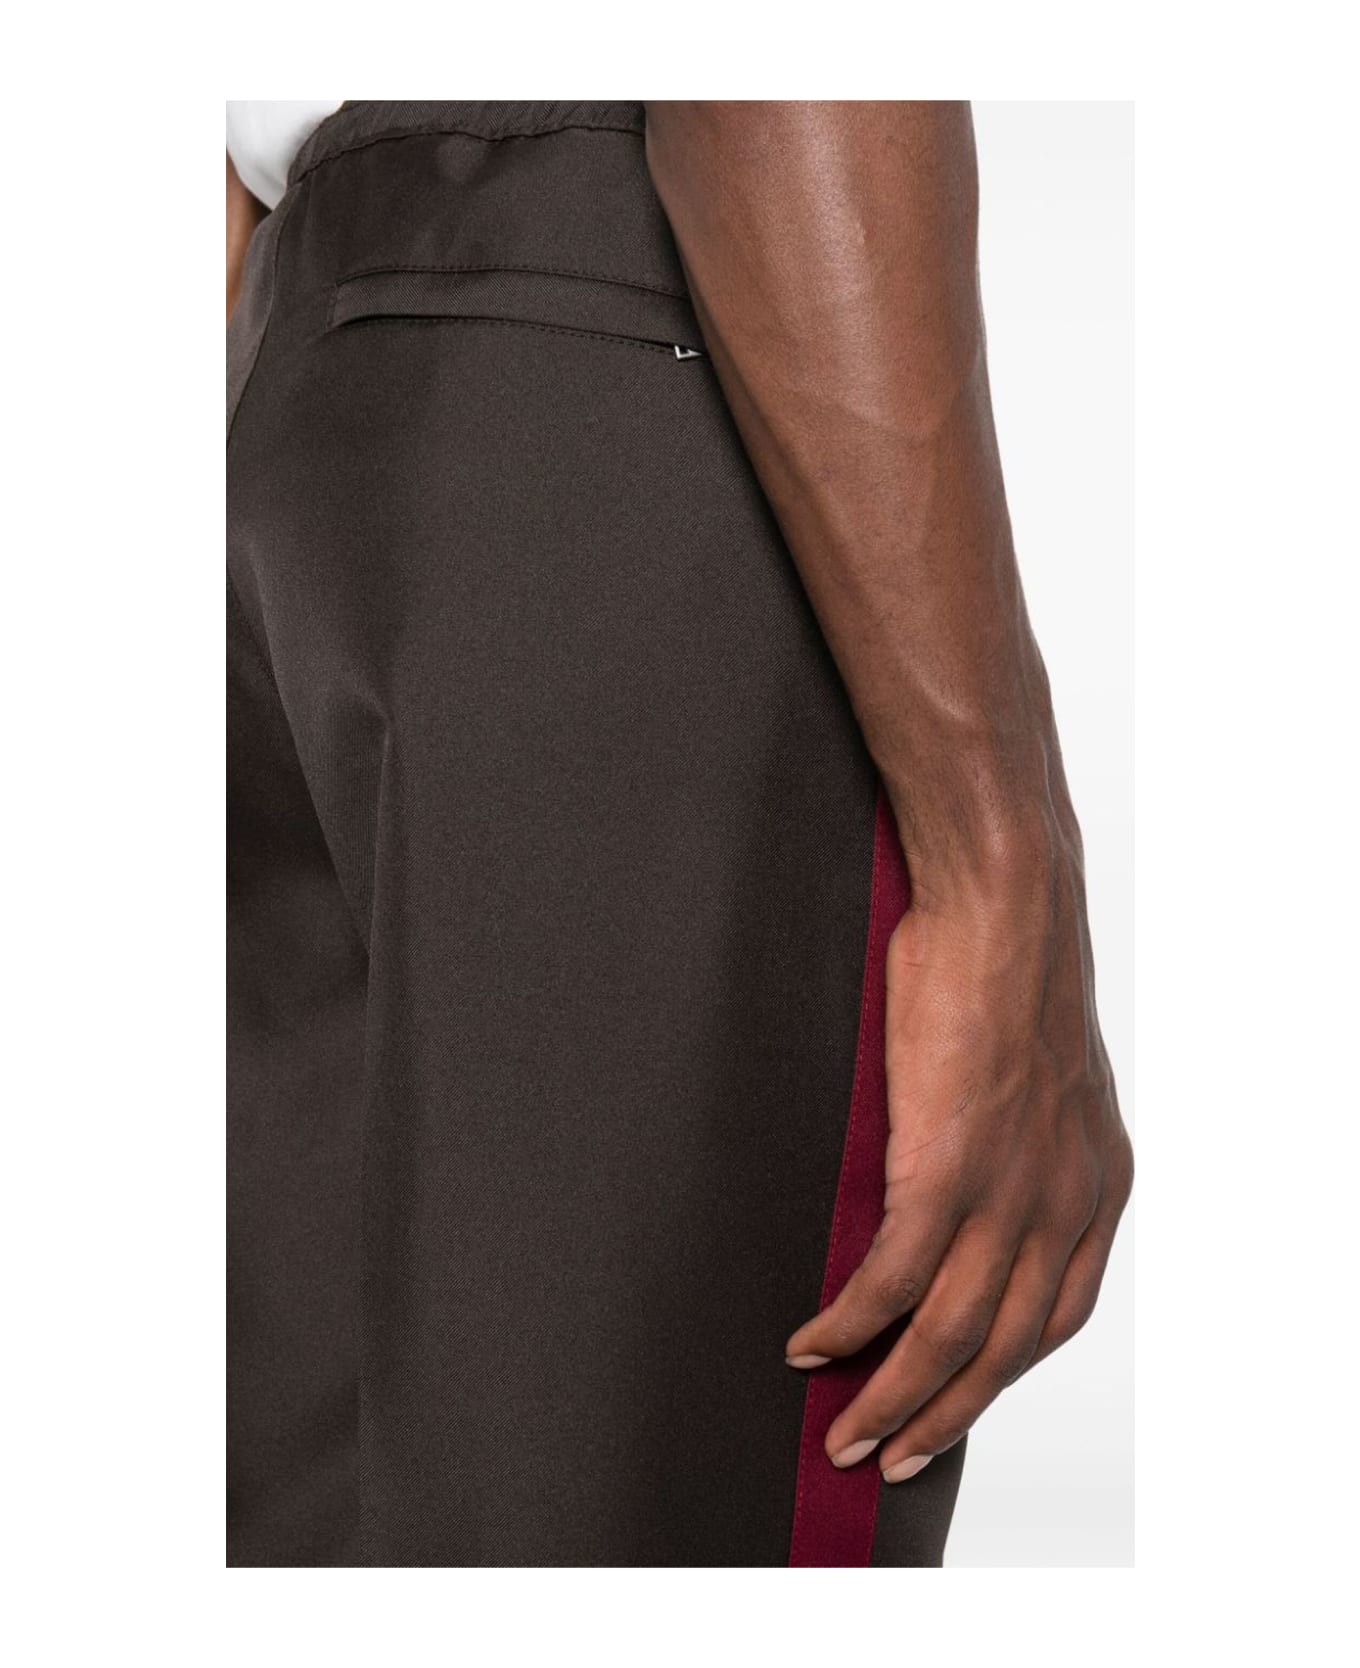 Lanvin Coffee Brown Cotton Blend Trousers - Expresso